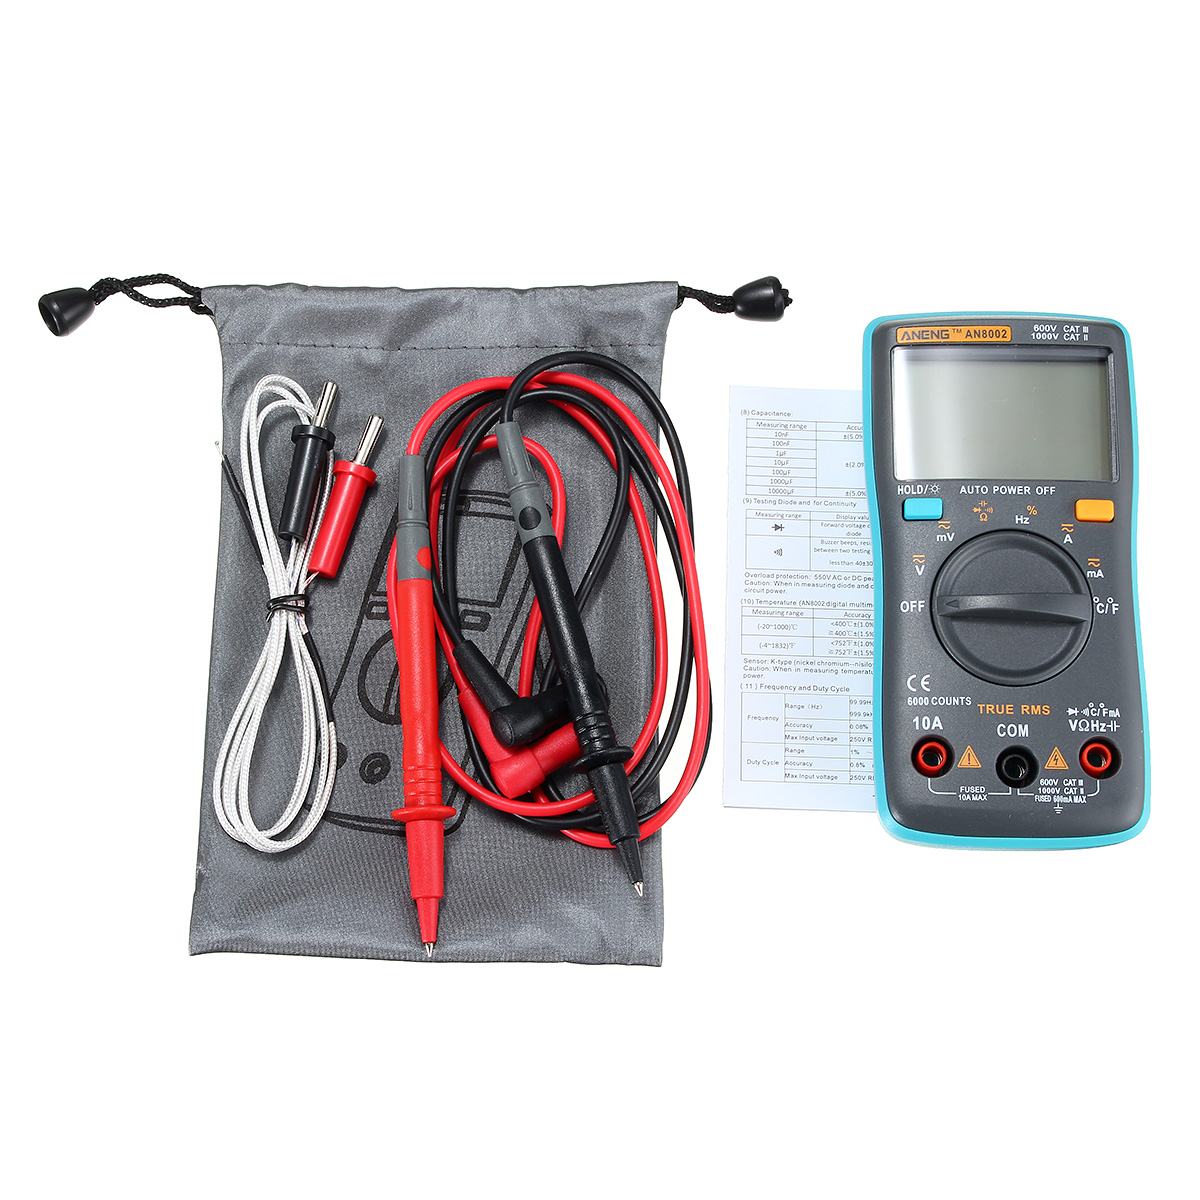 ANENG AN8002 Digital True RMS 6000 Counts Multimeter AC/DC Current Voltage Frequency Resistance Temperature Tester ℃/℉ 65